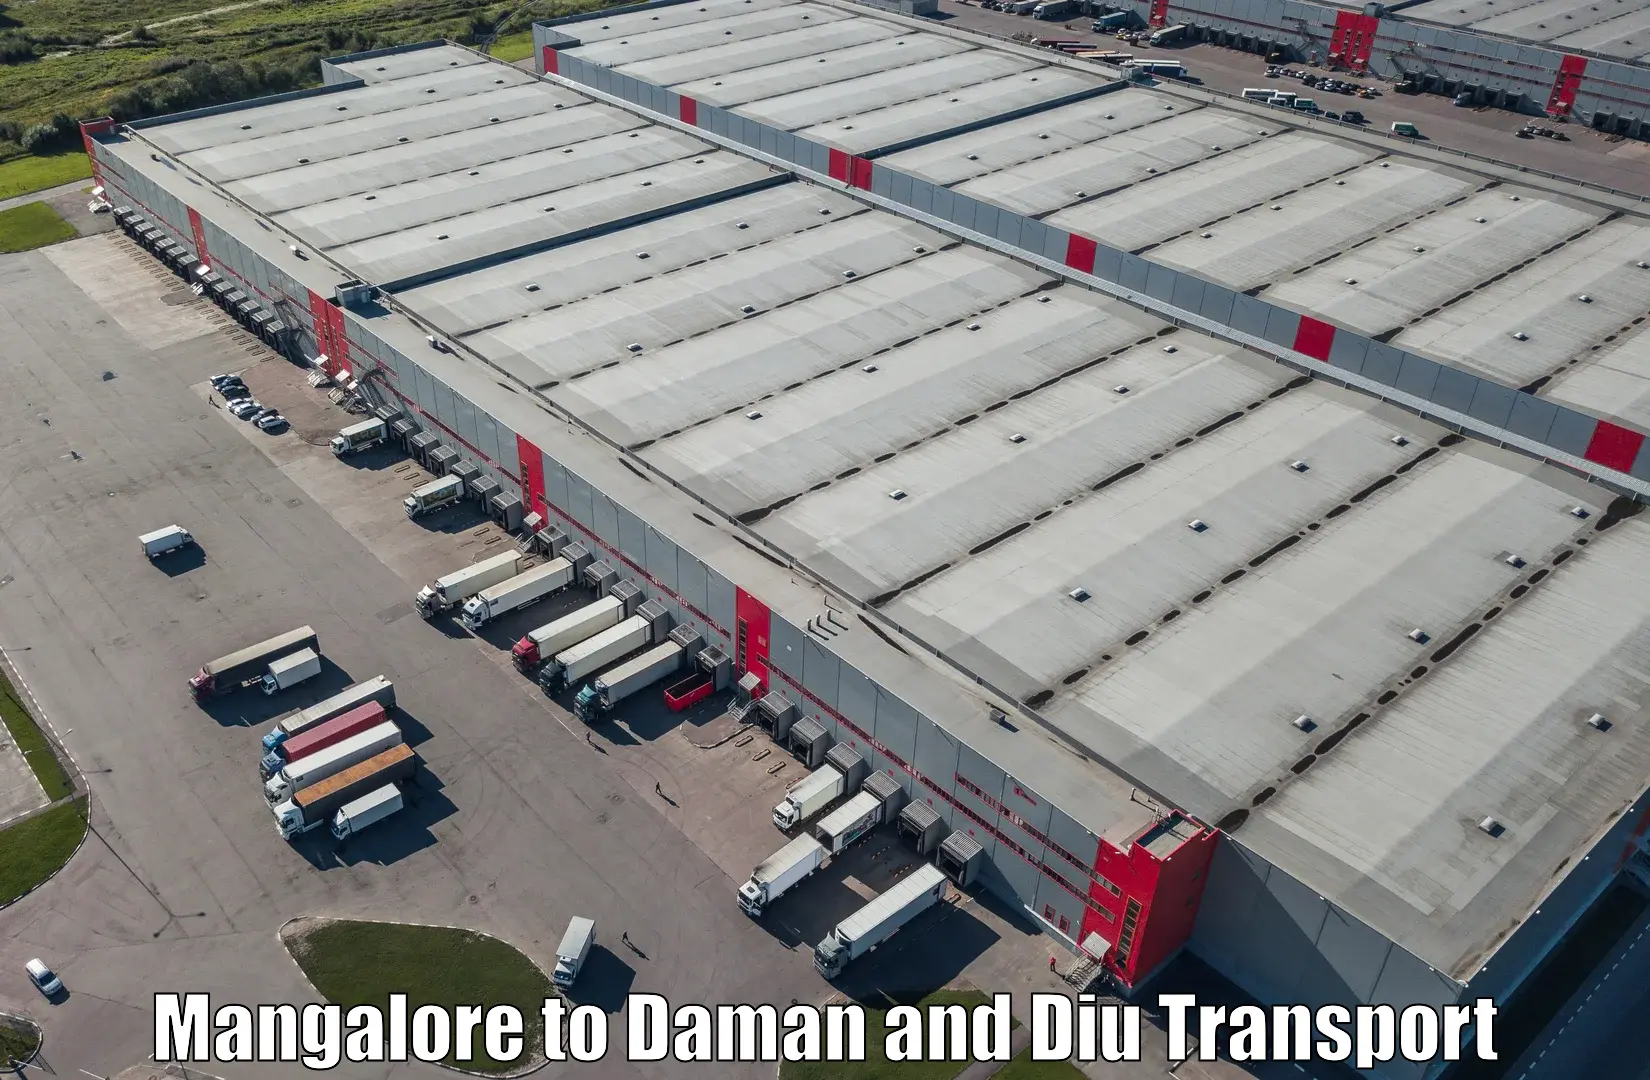 Goods delivery service Mangalore to Diu